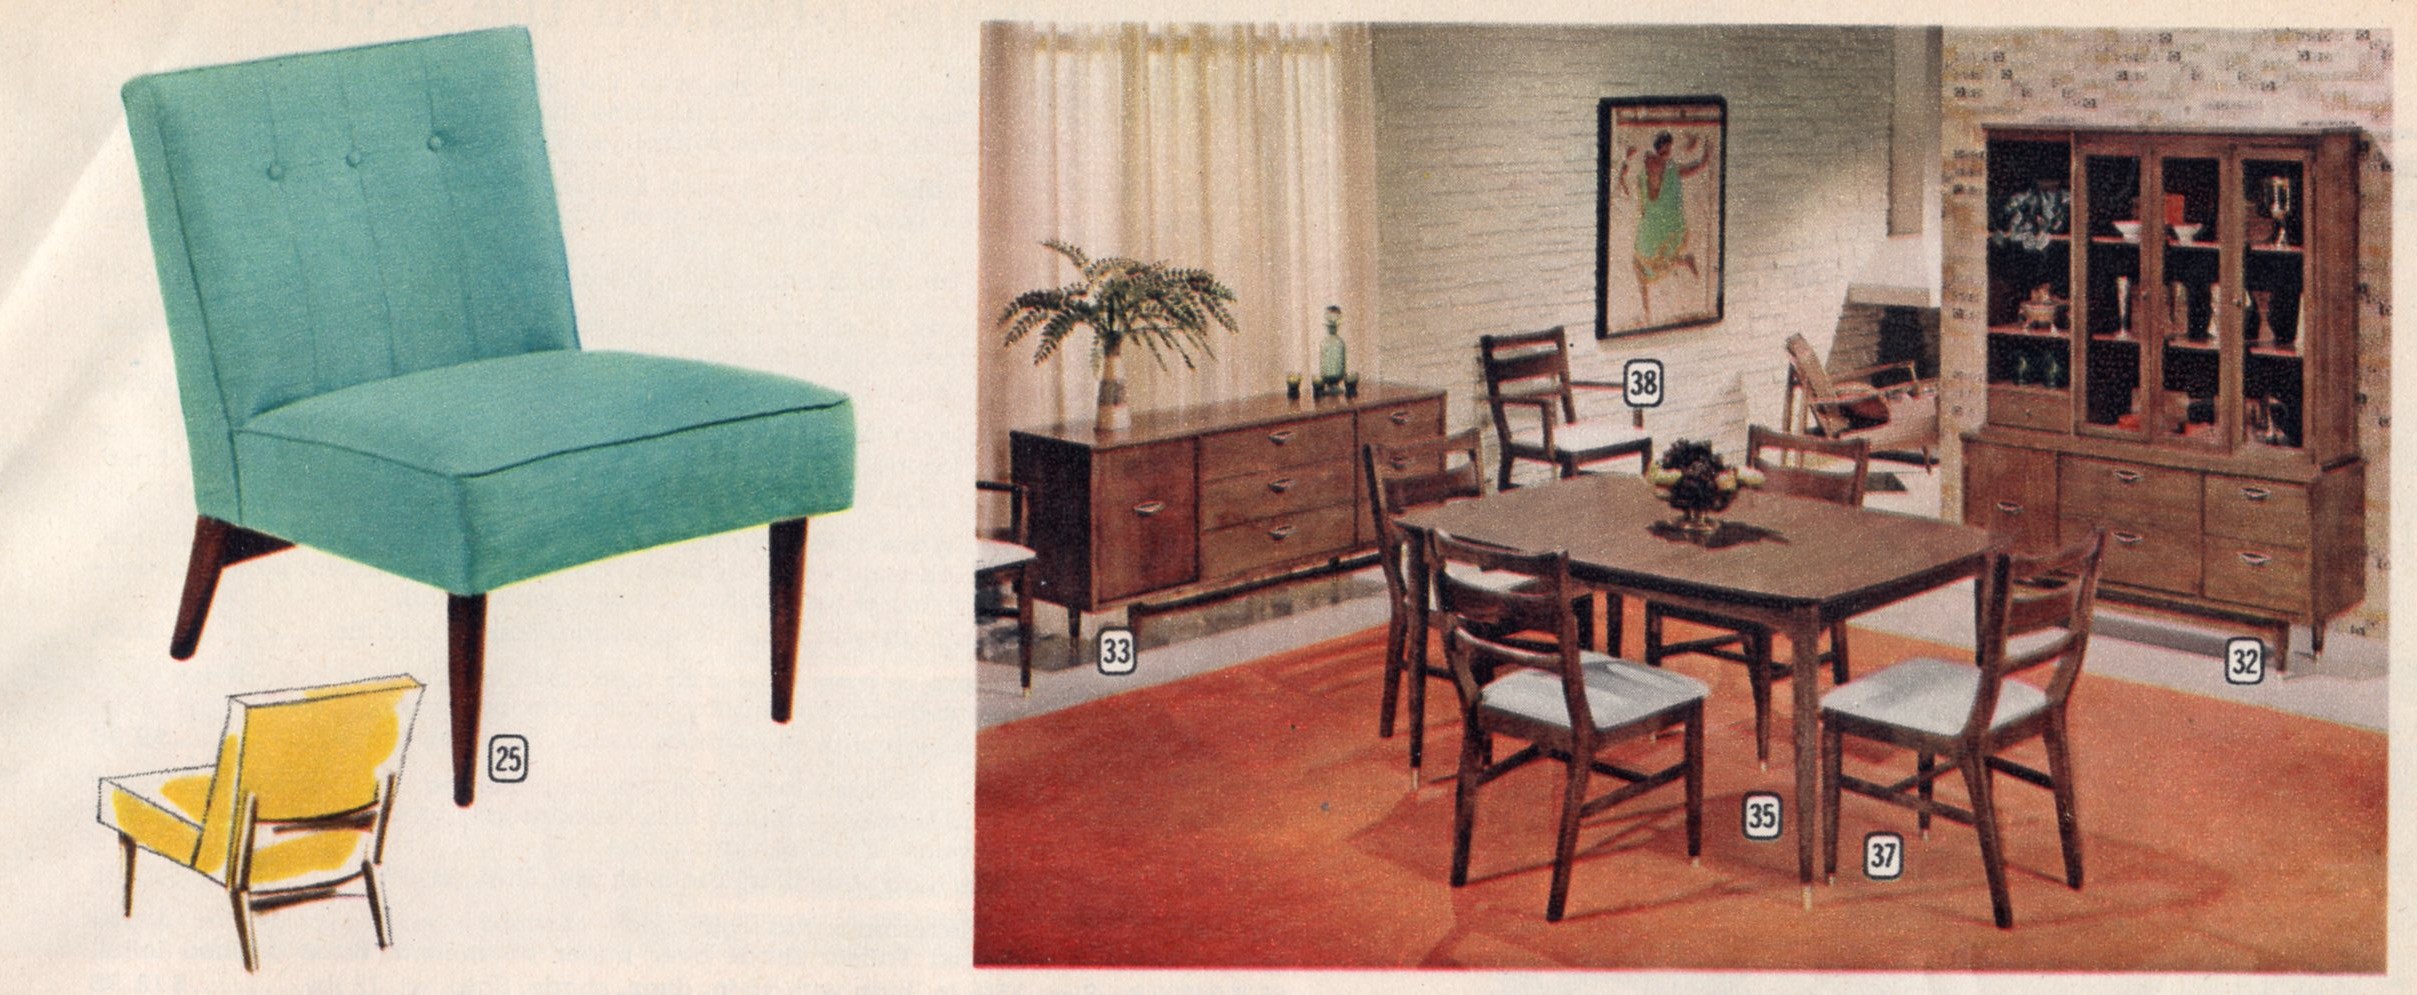 a vintage dining room with blue chairs and yellow furniture